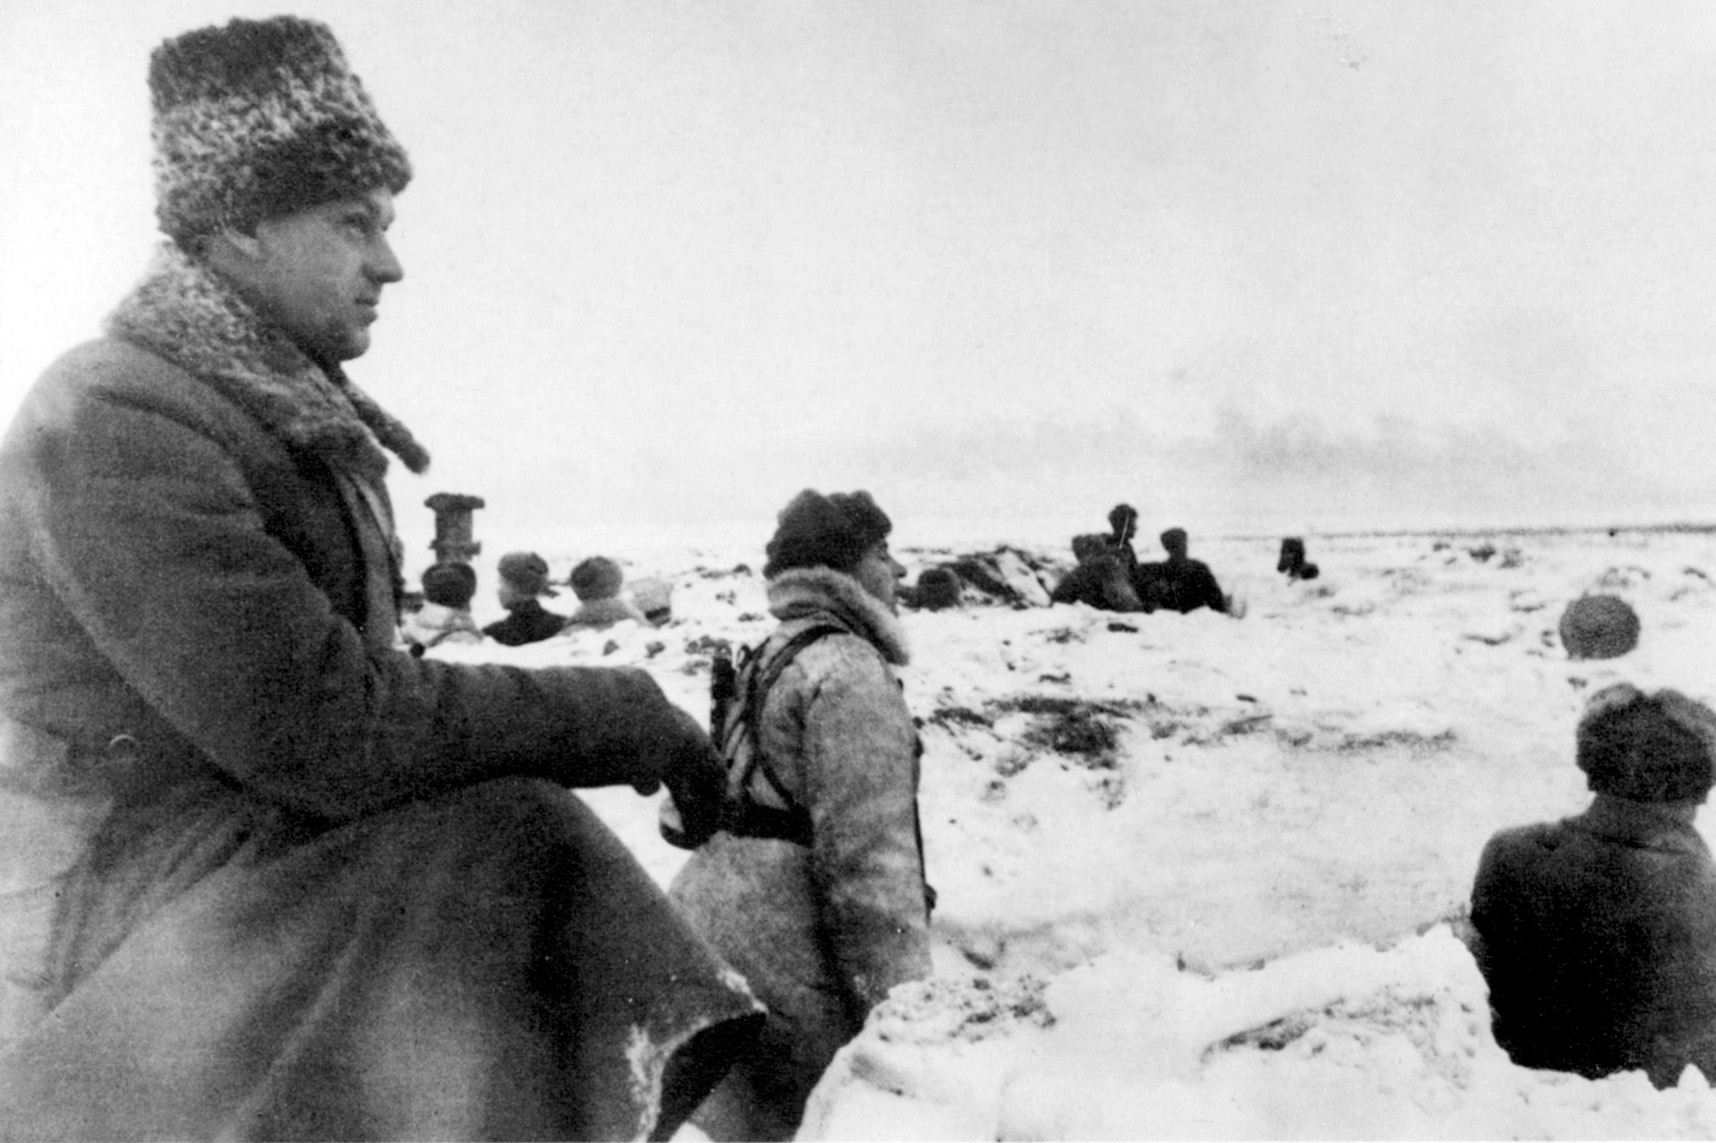 Commander of the Soviet Don Front, General Konstantin Rokossovsky observes units moving forward to attack German positions around the embattled city of Stalingrad.